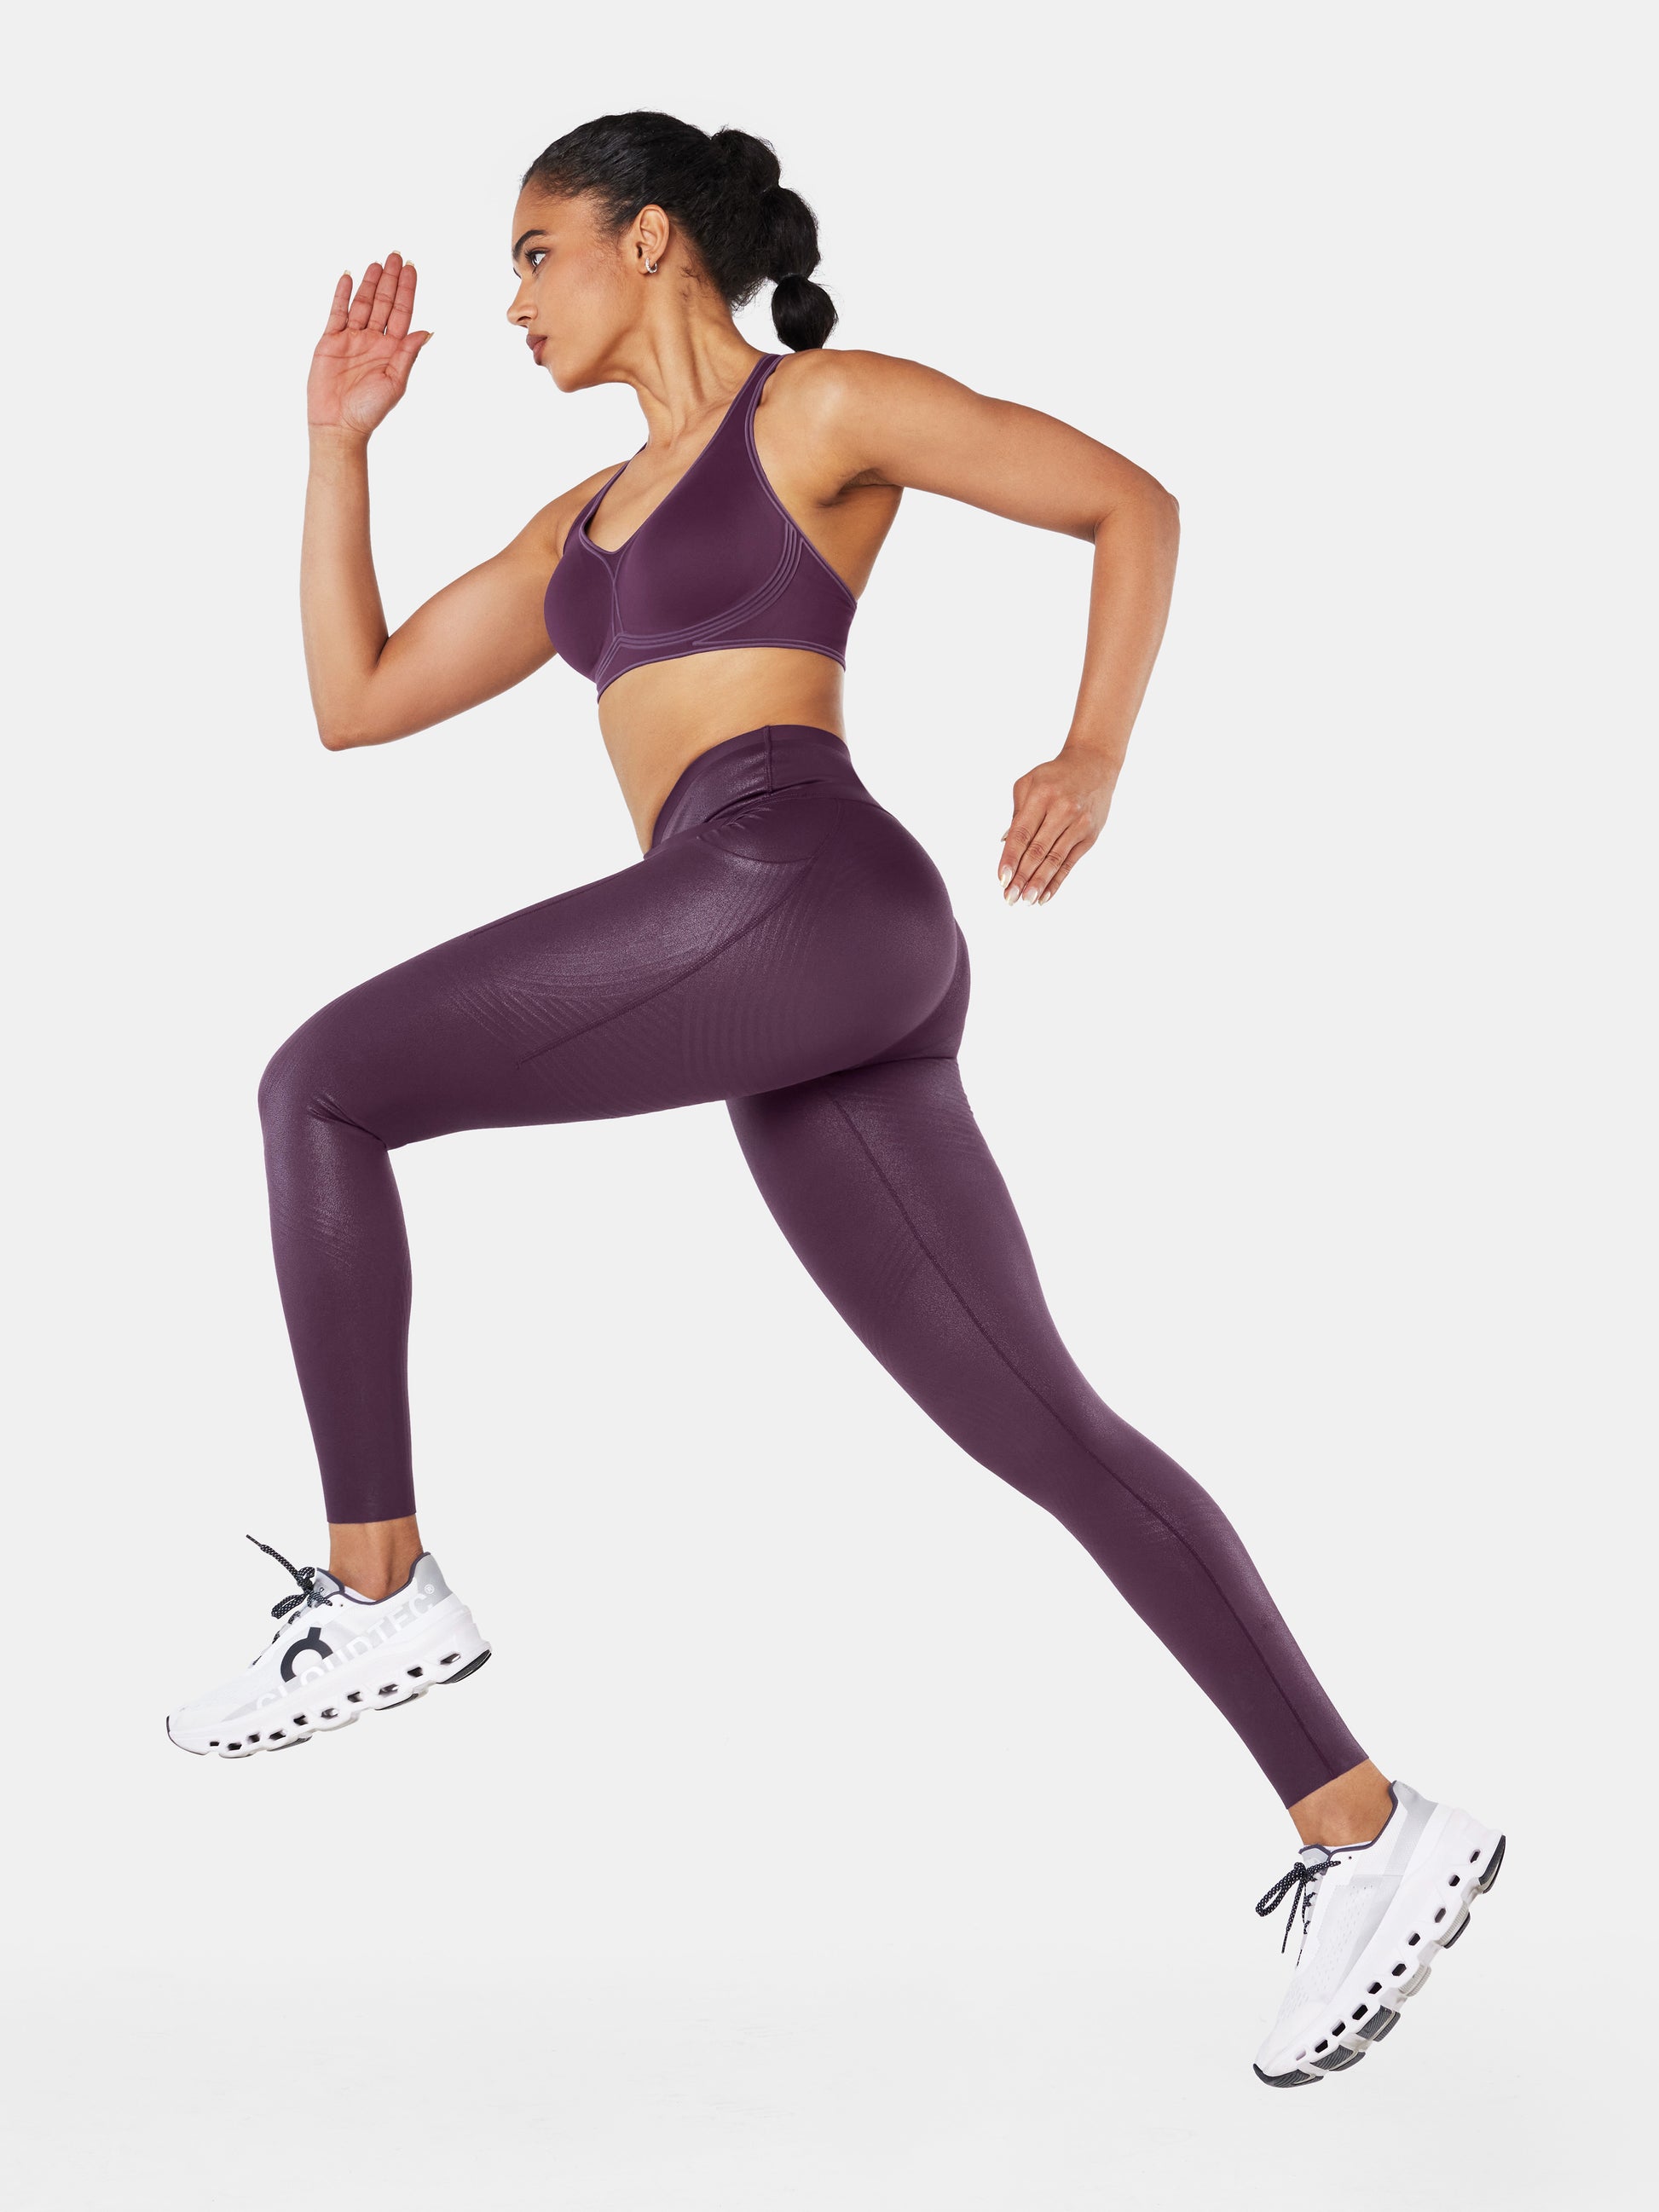 Fanka on Instagram: Brighten your workout, brighten your goals. ⁠ Body  Sculpt Faux Leather Leggings are here to shine alongside you as you conquer  every challenge in style!⁠ ⁠ ⁠ #fanka #fankafam #movewithfanka